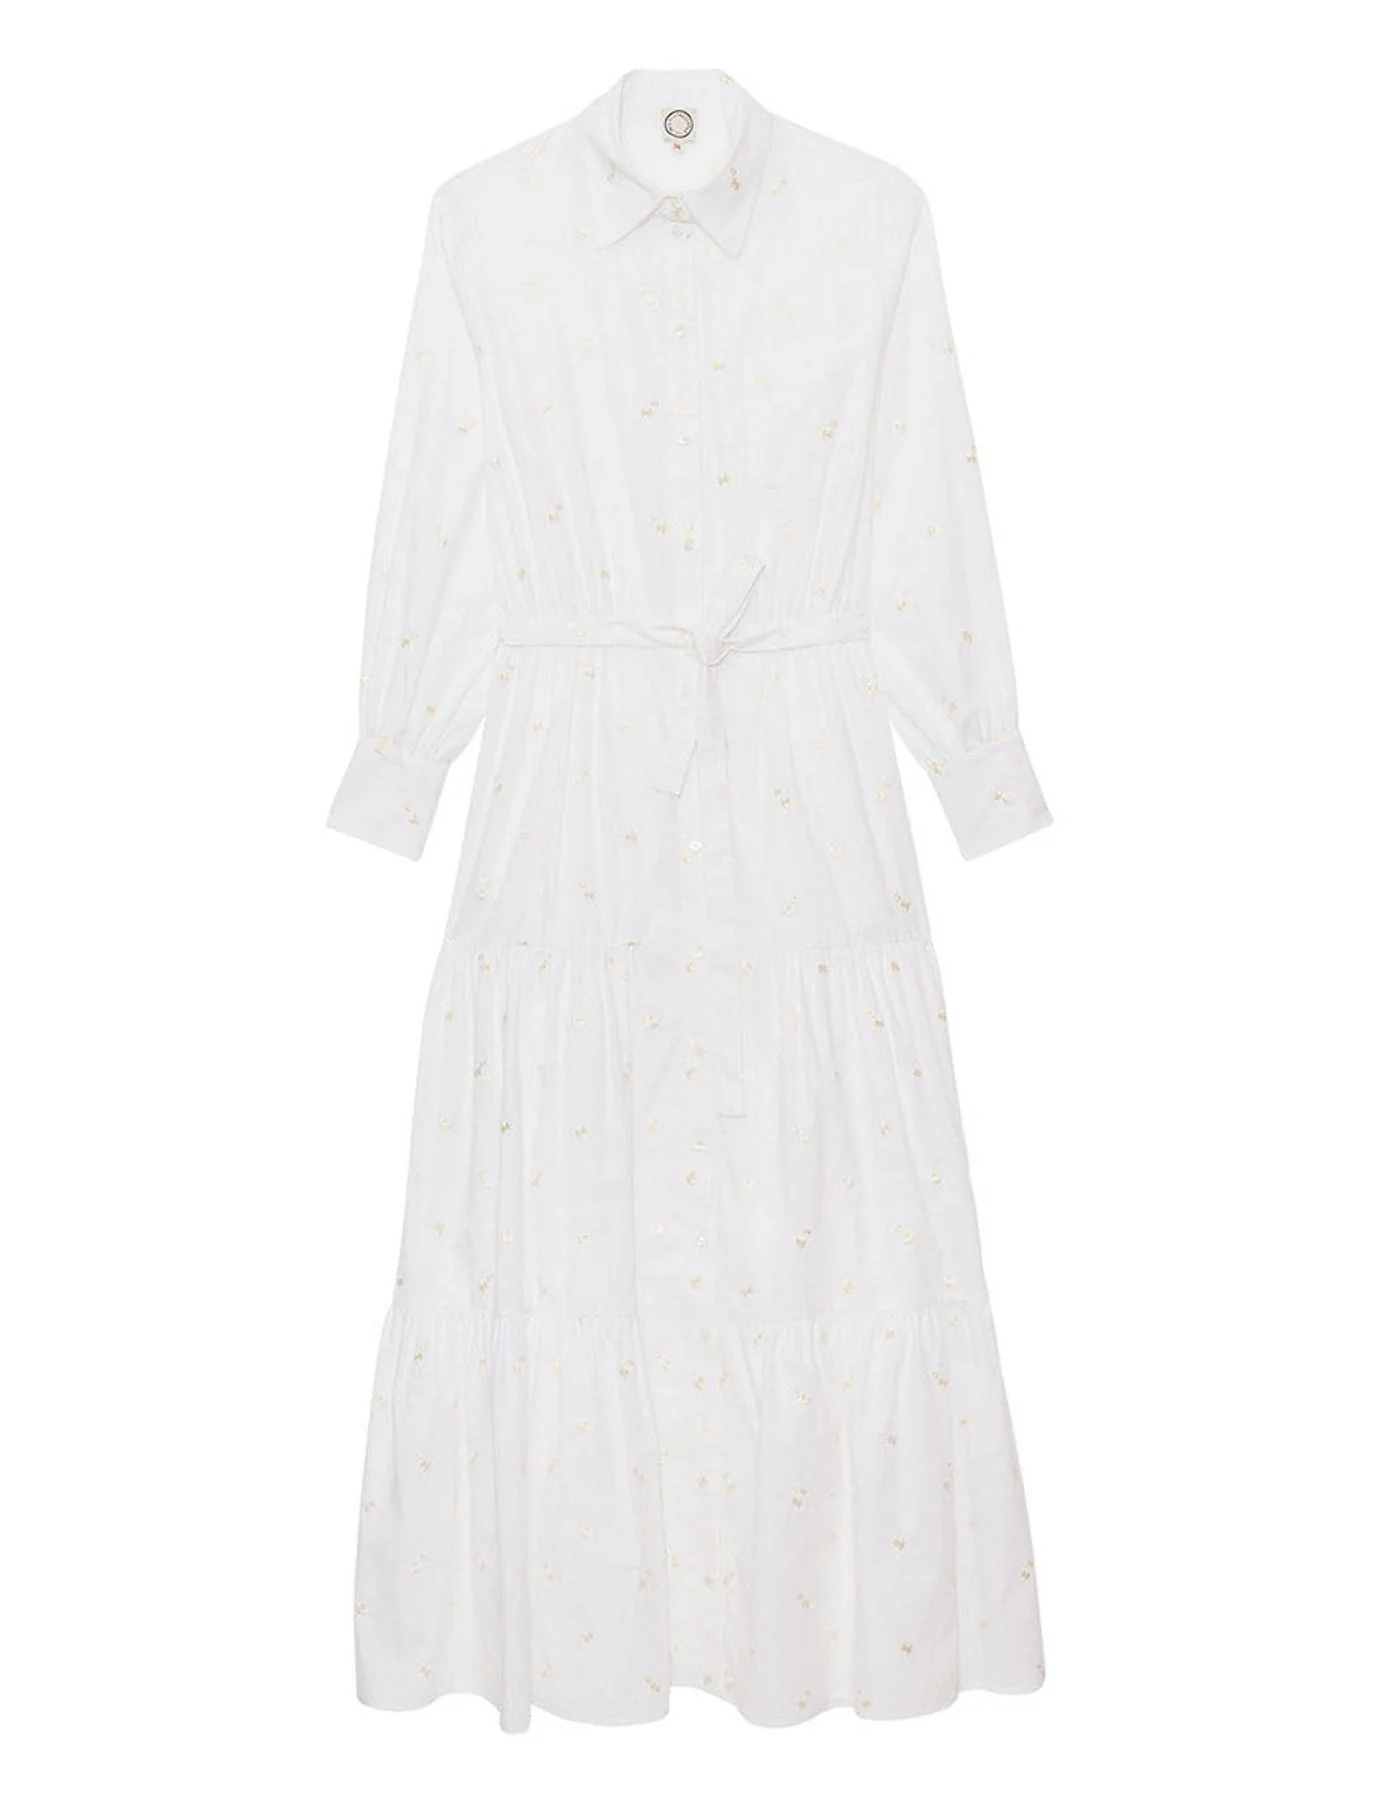 dress-lena-long-a-fly-white-and-fabric-brode